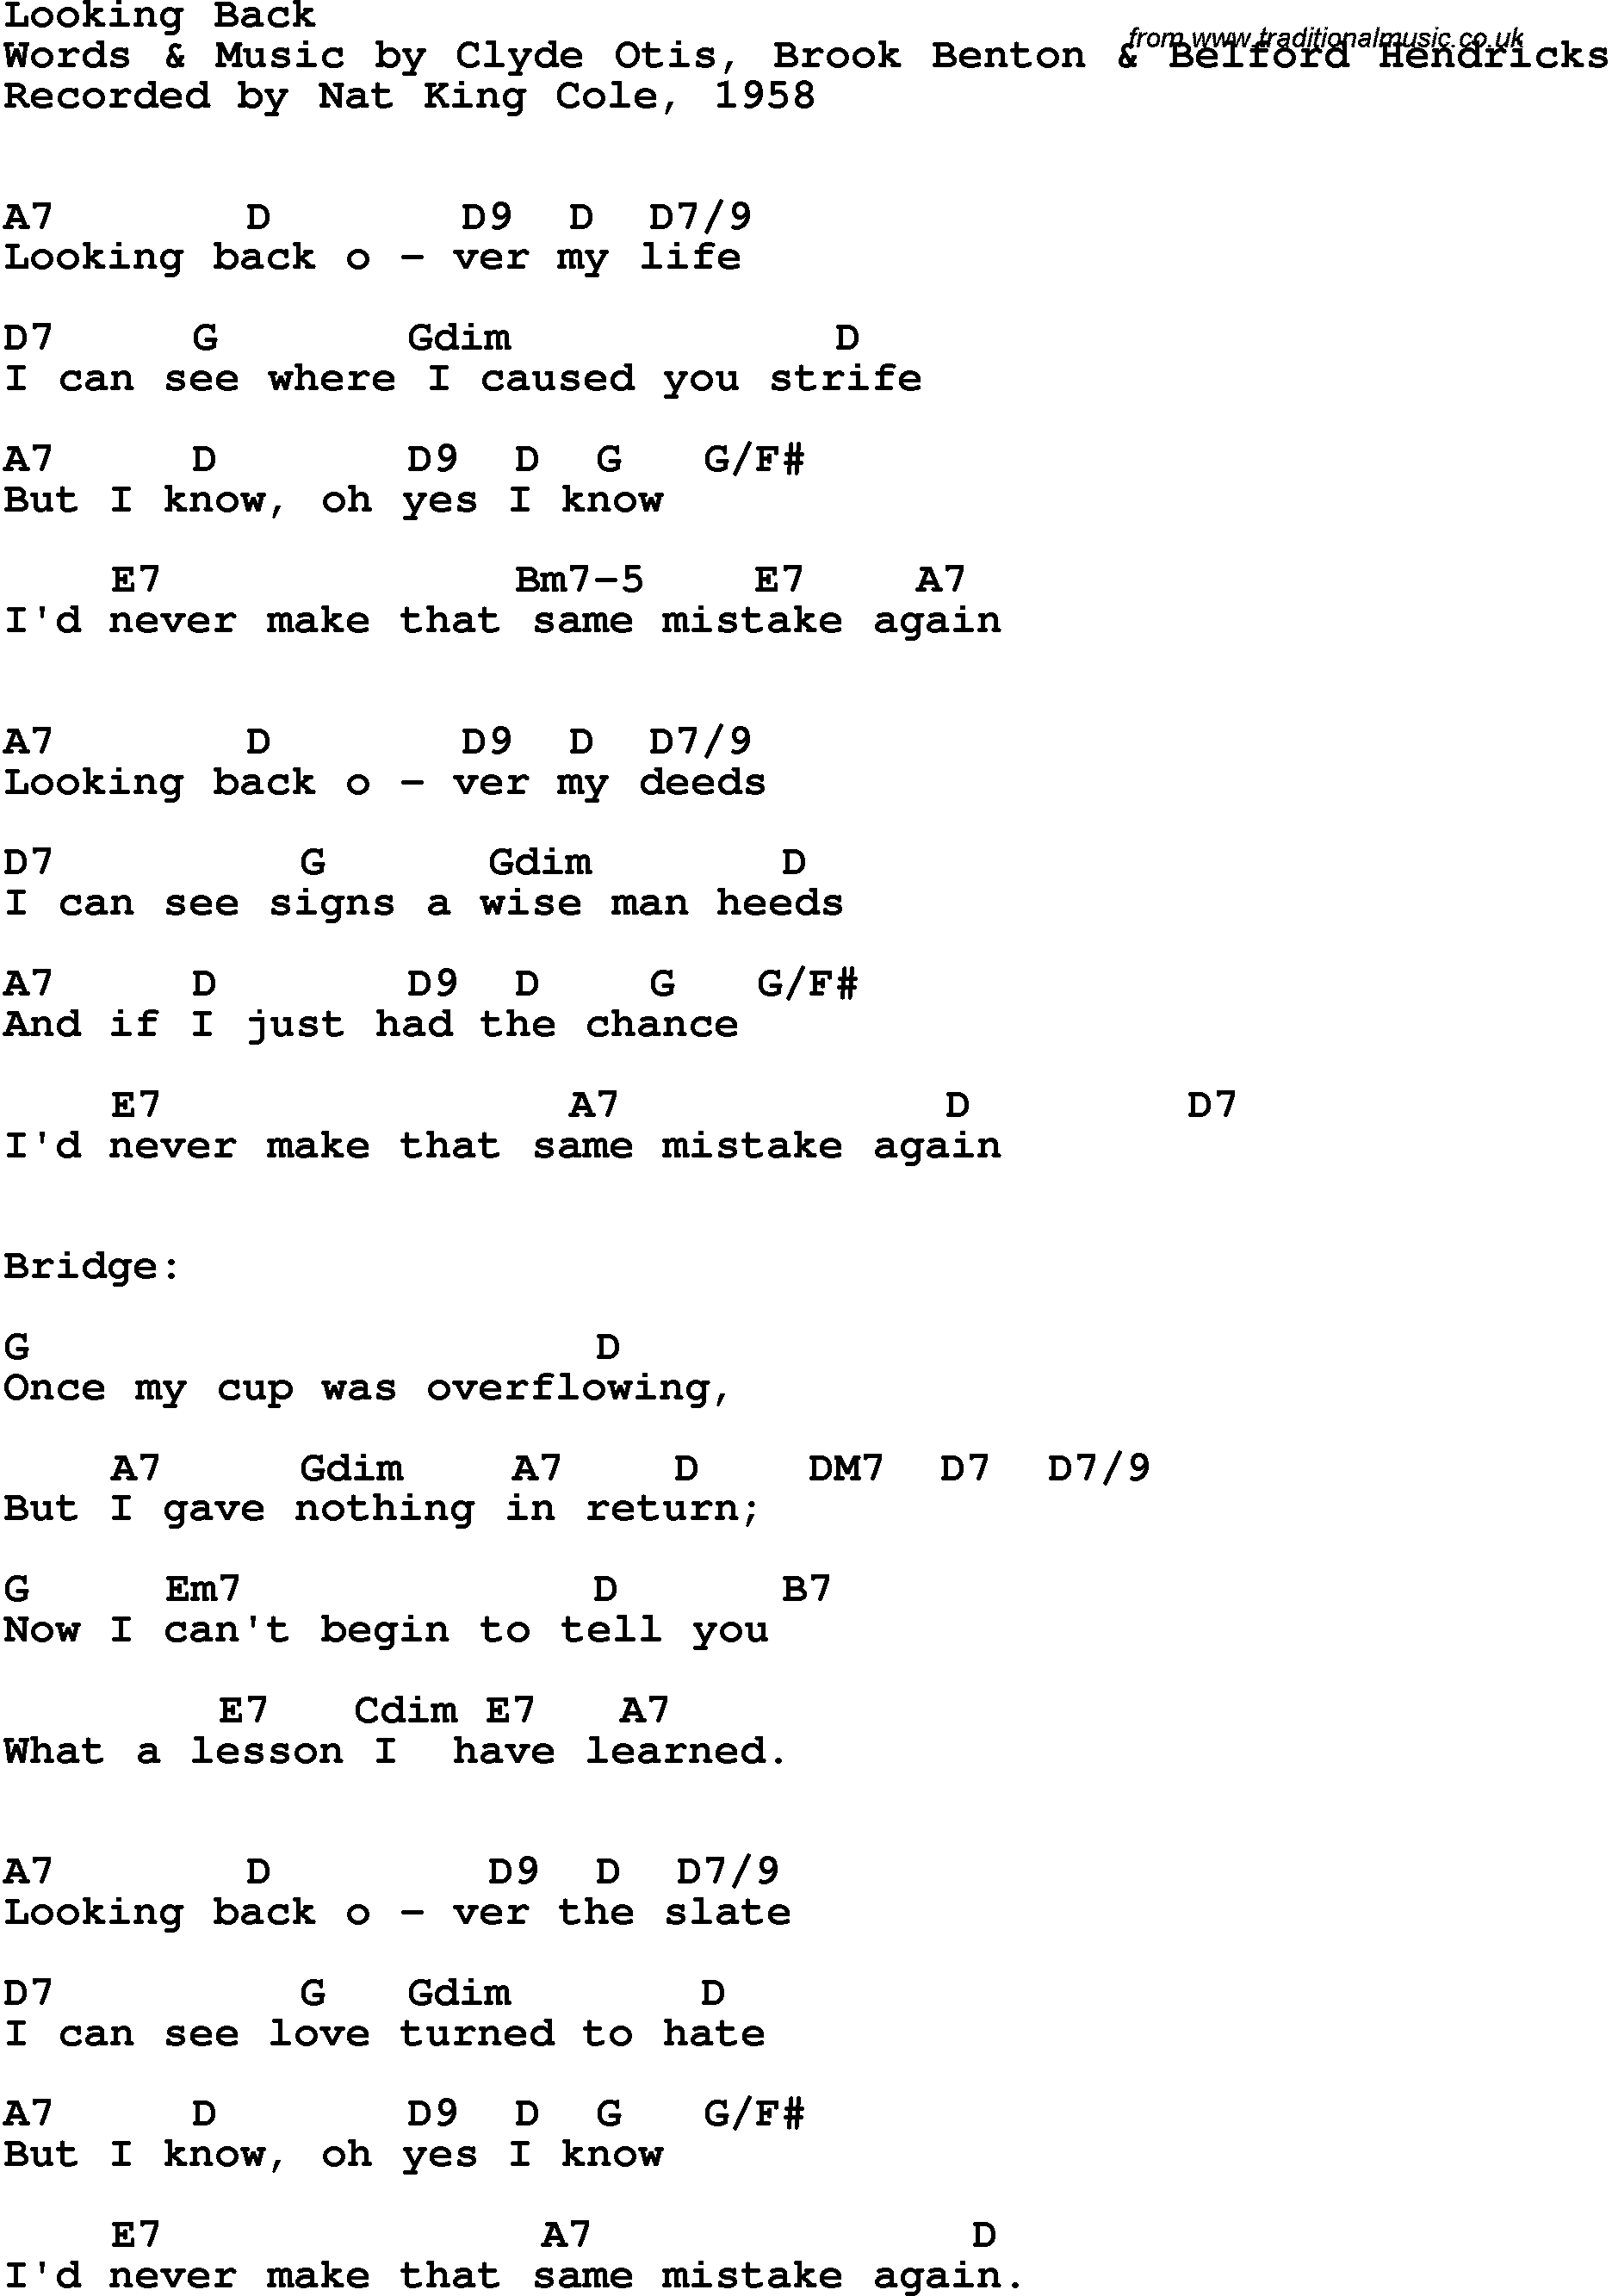 Song Lyrics with guitar chords for Looking Back - Nat King Cole, 1958